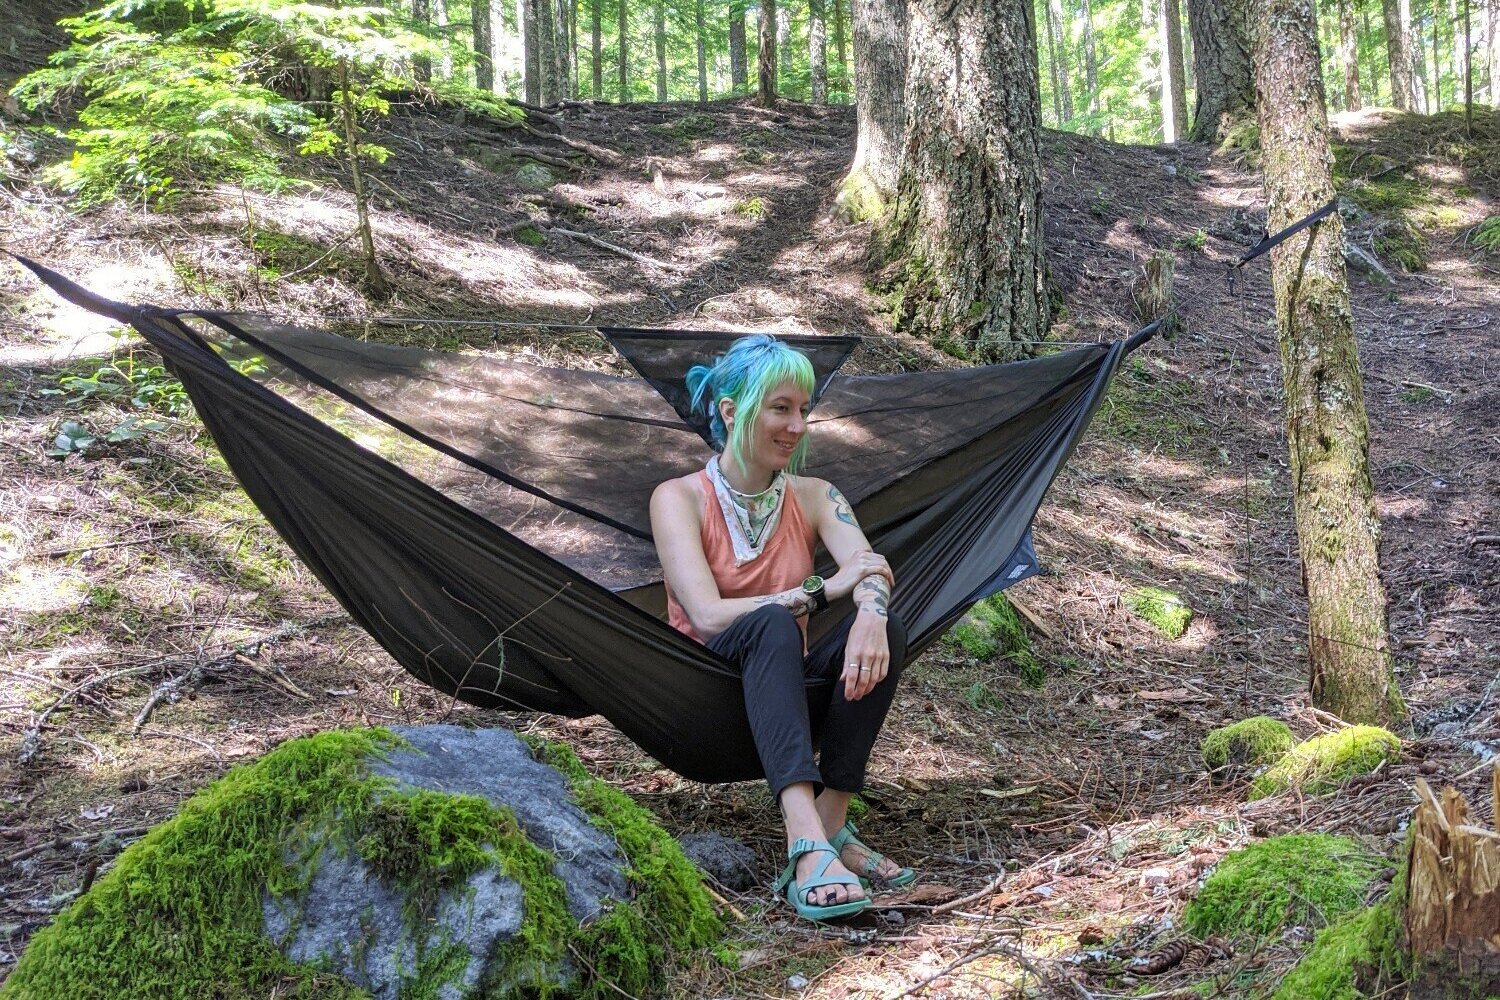 Details about   Garden Hammock Camping for 2 People Hiking Trips with Bag show original title 